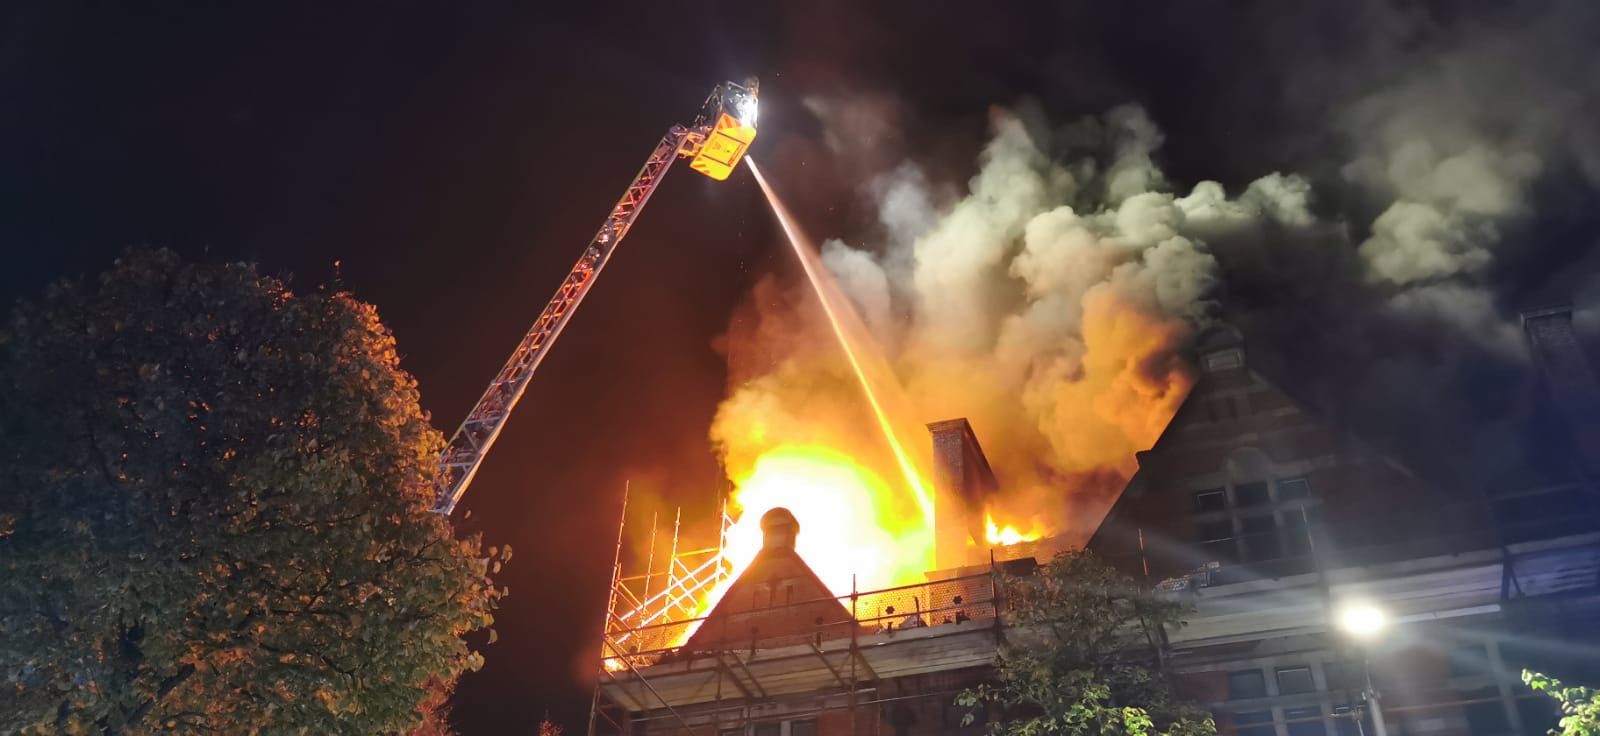 BLAZE: The fire broke out in the early hours of Monday morning at the Old Cathedral Building